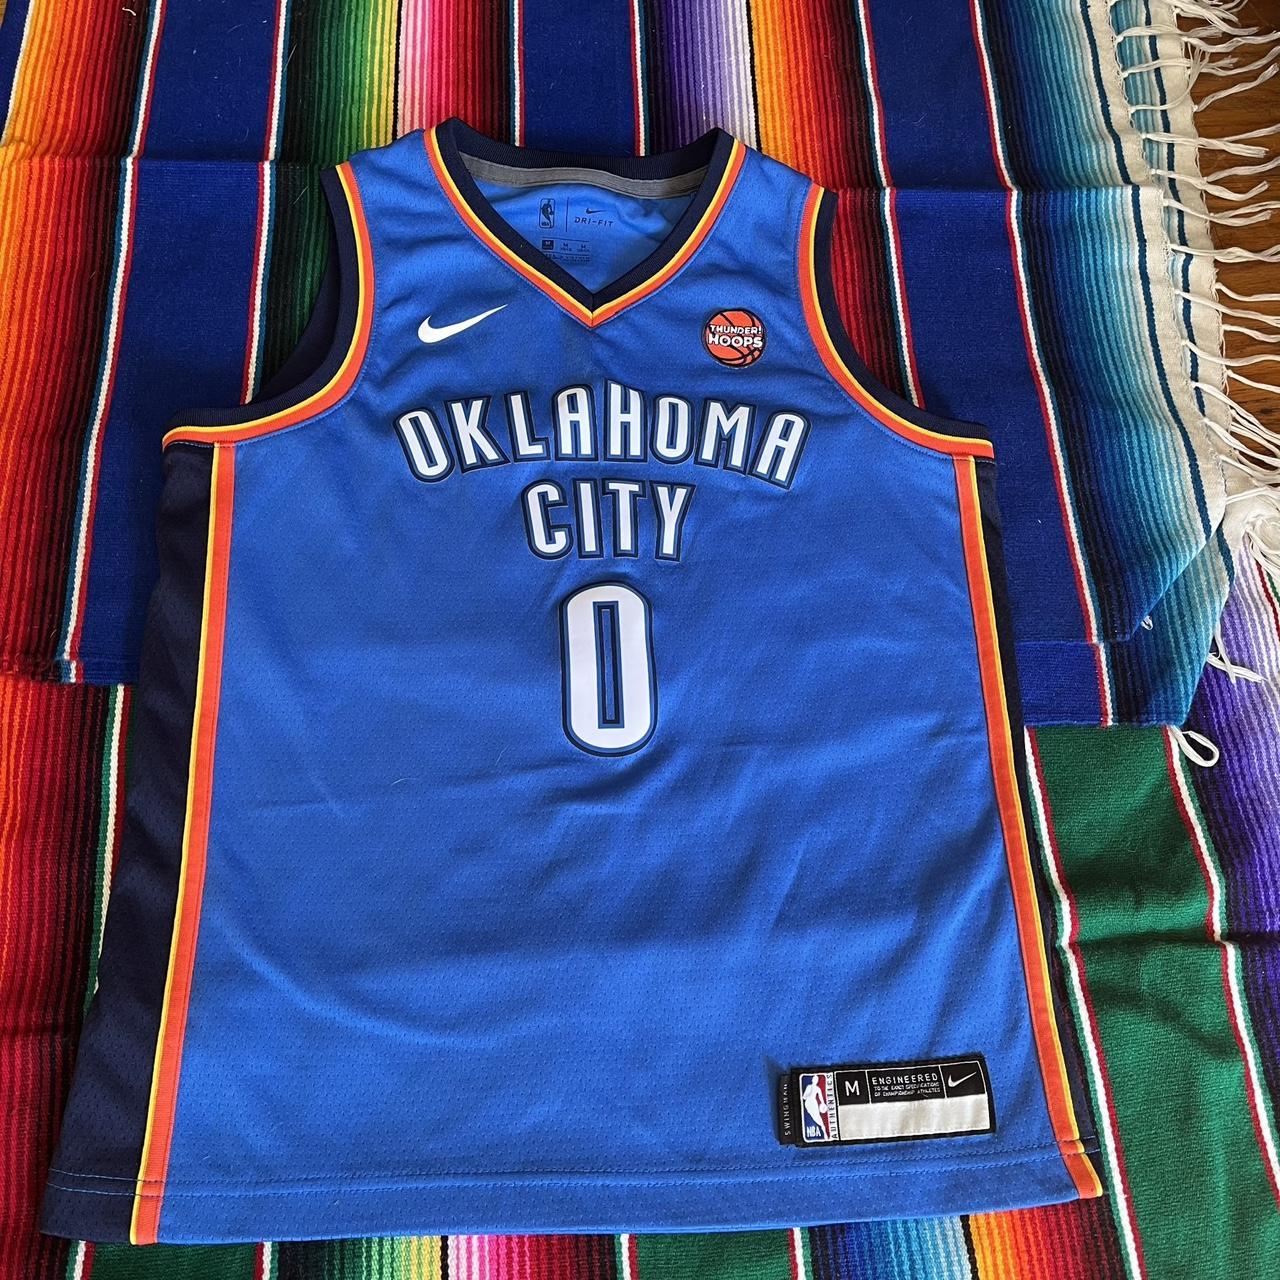 russell westbrook jersey thunder